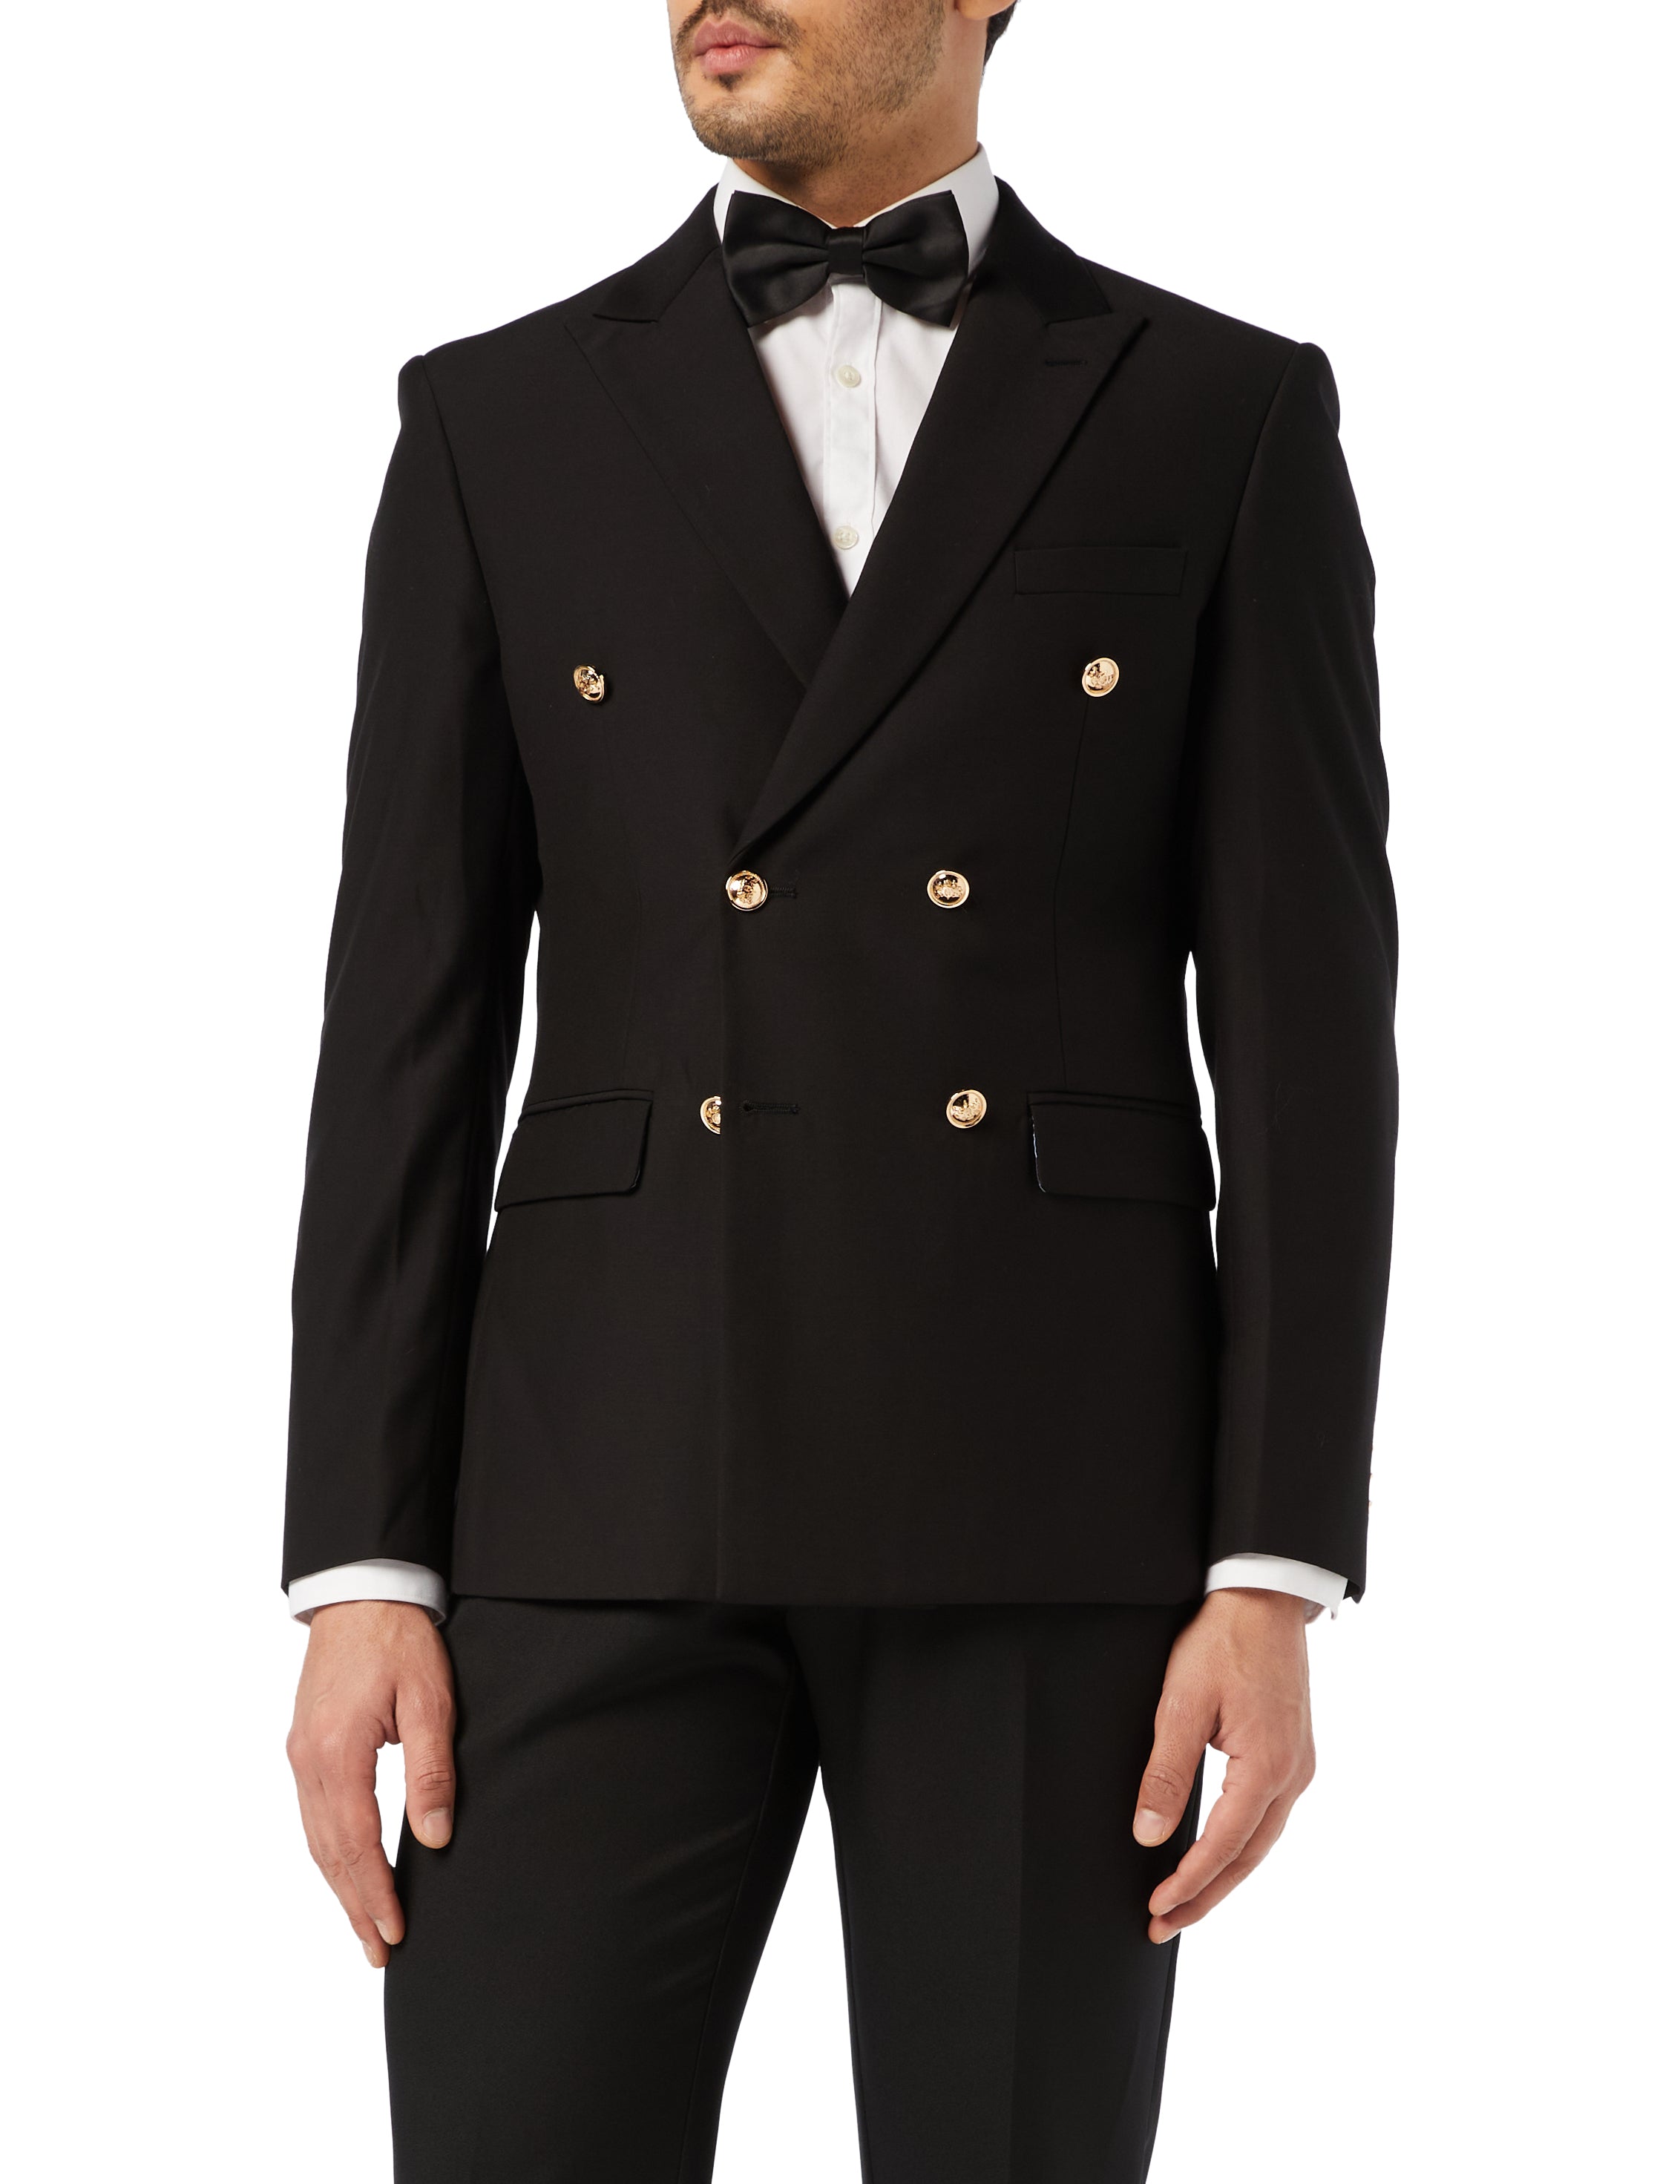 Classic Black Double Breasted Gold Button Jacket